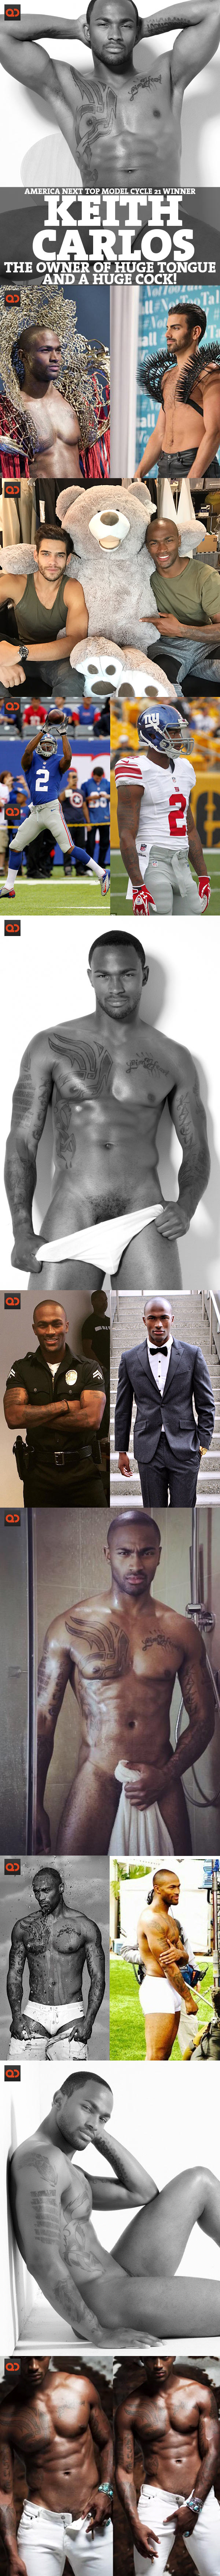 Keith Carlos, America Next Top Model Cycle 21 Winner, Is The Owner Of Huge Tongue And A Huge Cock!